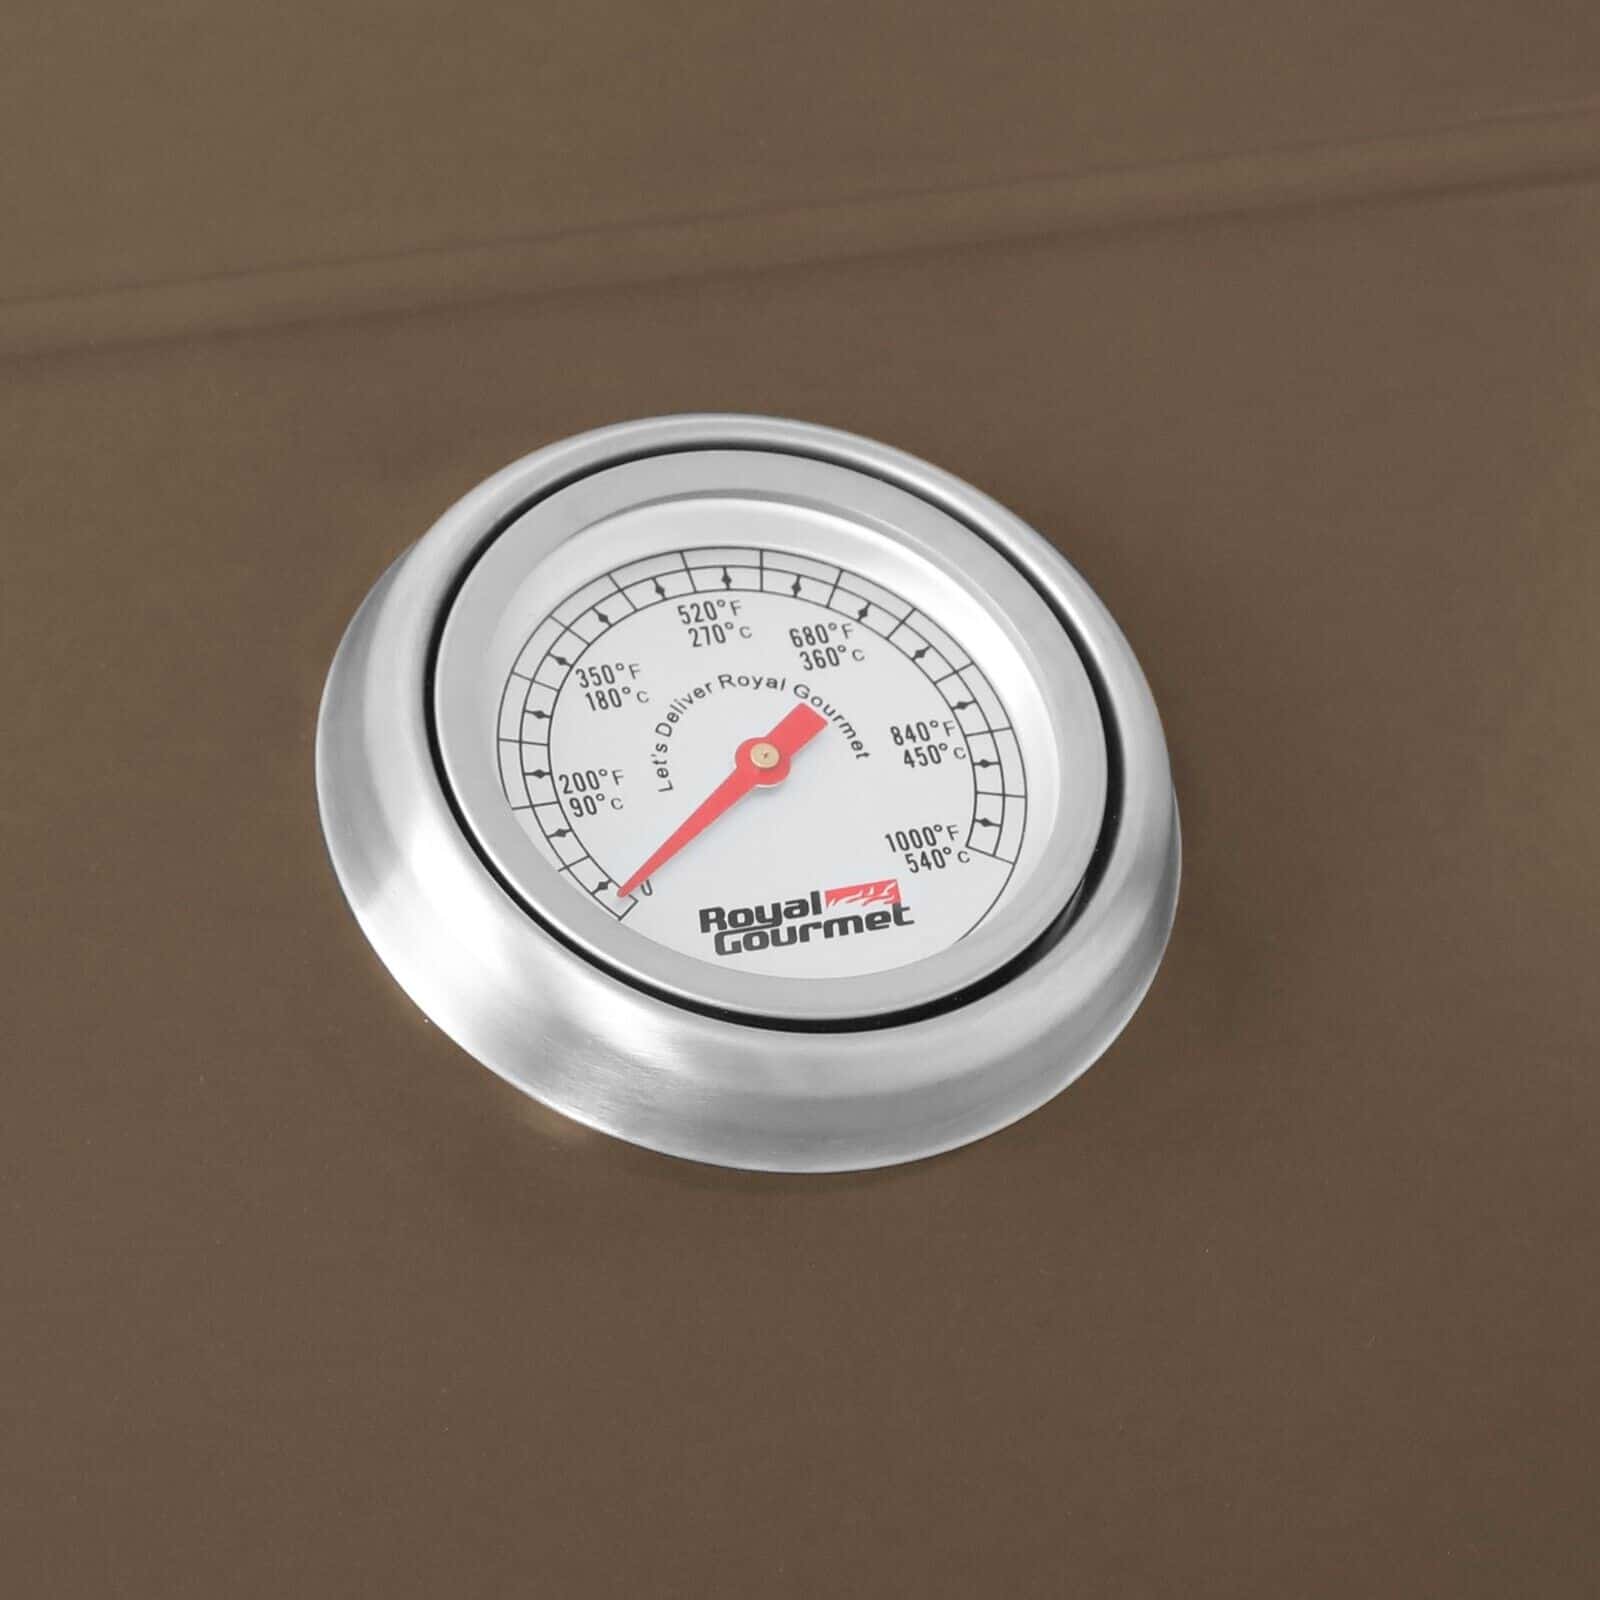 A thermometer is shown on a brown surface.